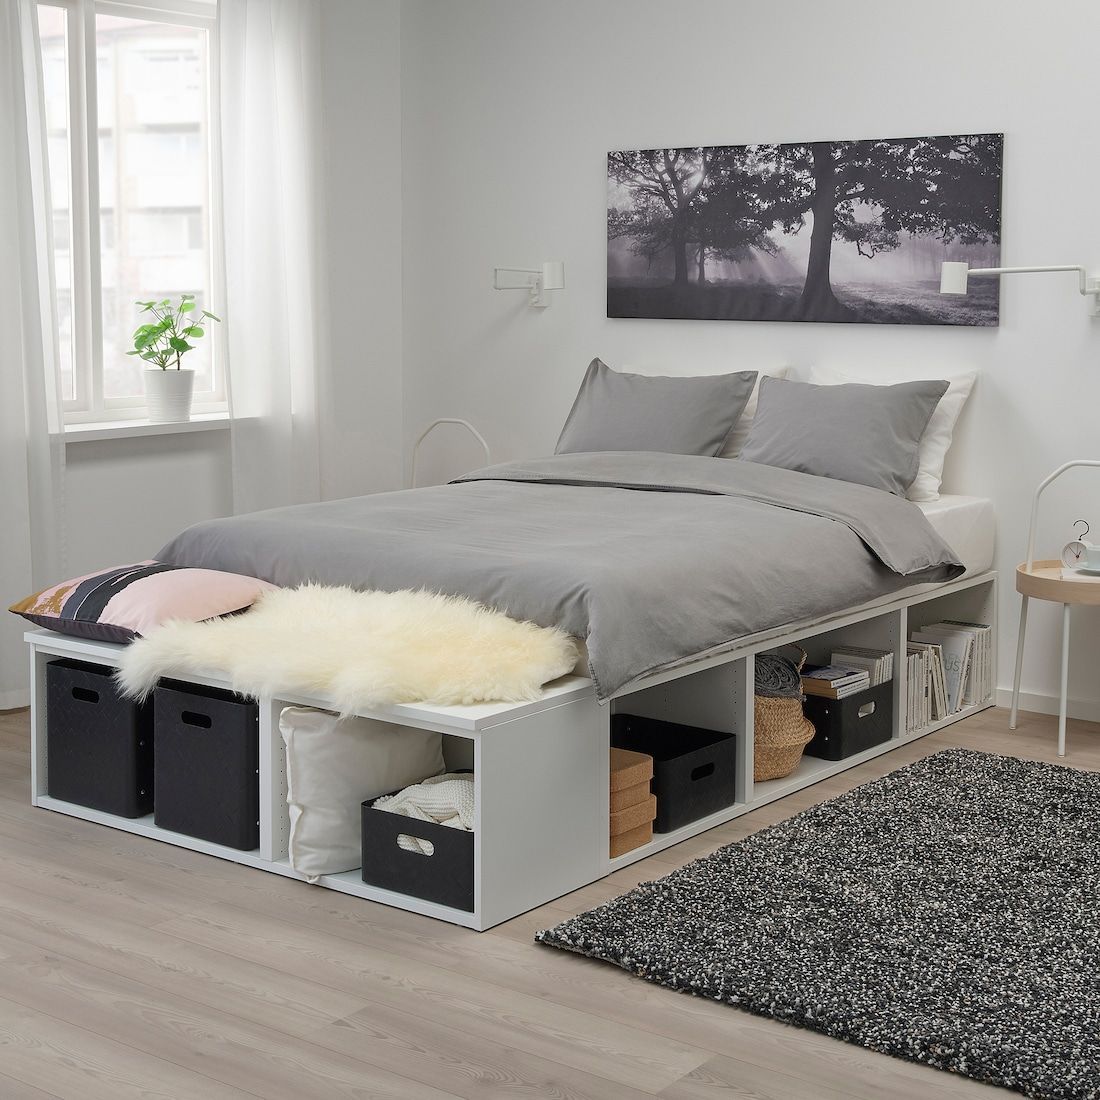 PLATSA white, Bed with storage, Depth storage space: 40 cm Length: 244 cm - IKEA -   diy Bed Frame with storage